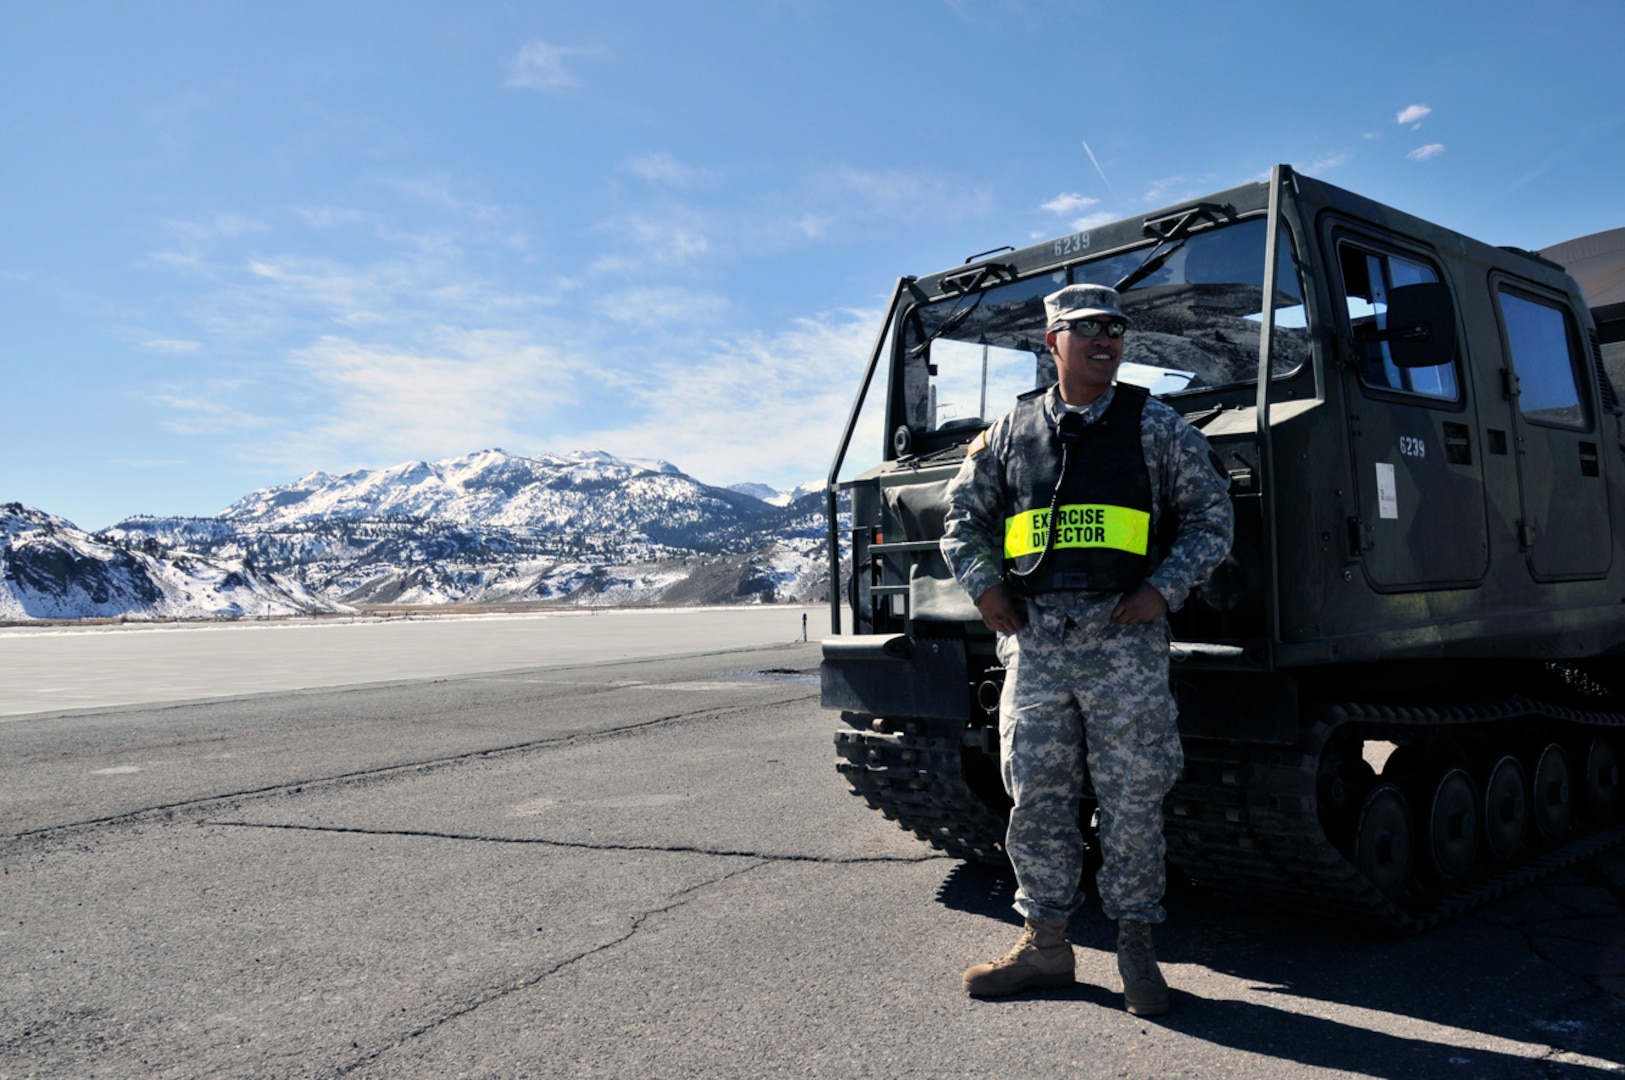 Army National Guard 1st Lt. Edward Baon, the 95th Civil Support Team medical operations officer and exercise Operation Red Snow director, leans on a Bandvagn, an all-terrain vehicle, at the Marine Corps Mountain Warfare Training Center about 20 miles northwest of Bridgeport, Calif. Nearly 100 California Air and Army National Guard members conducted cold weather training here Feb. 13-17, 2012 as part of Operation Red Snow.